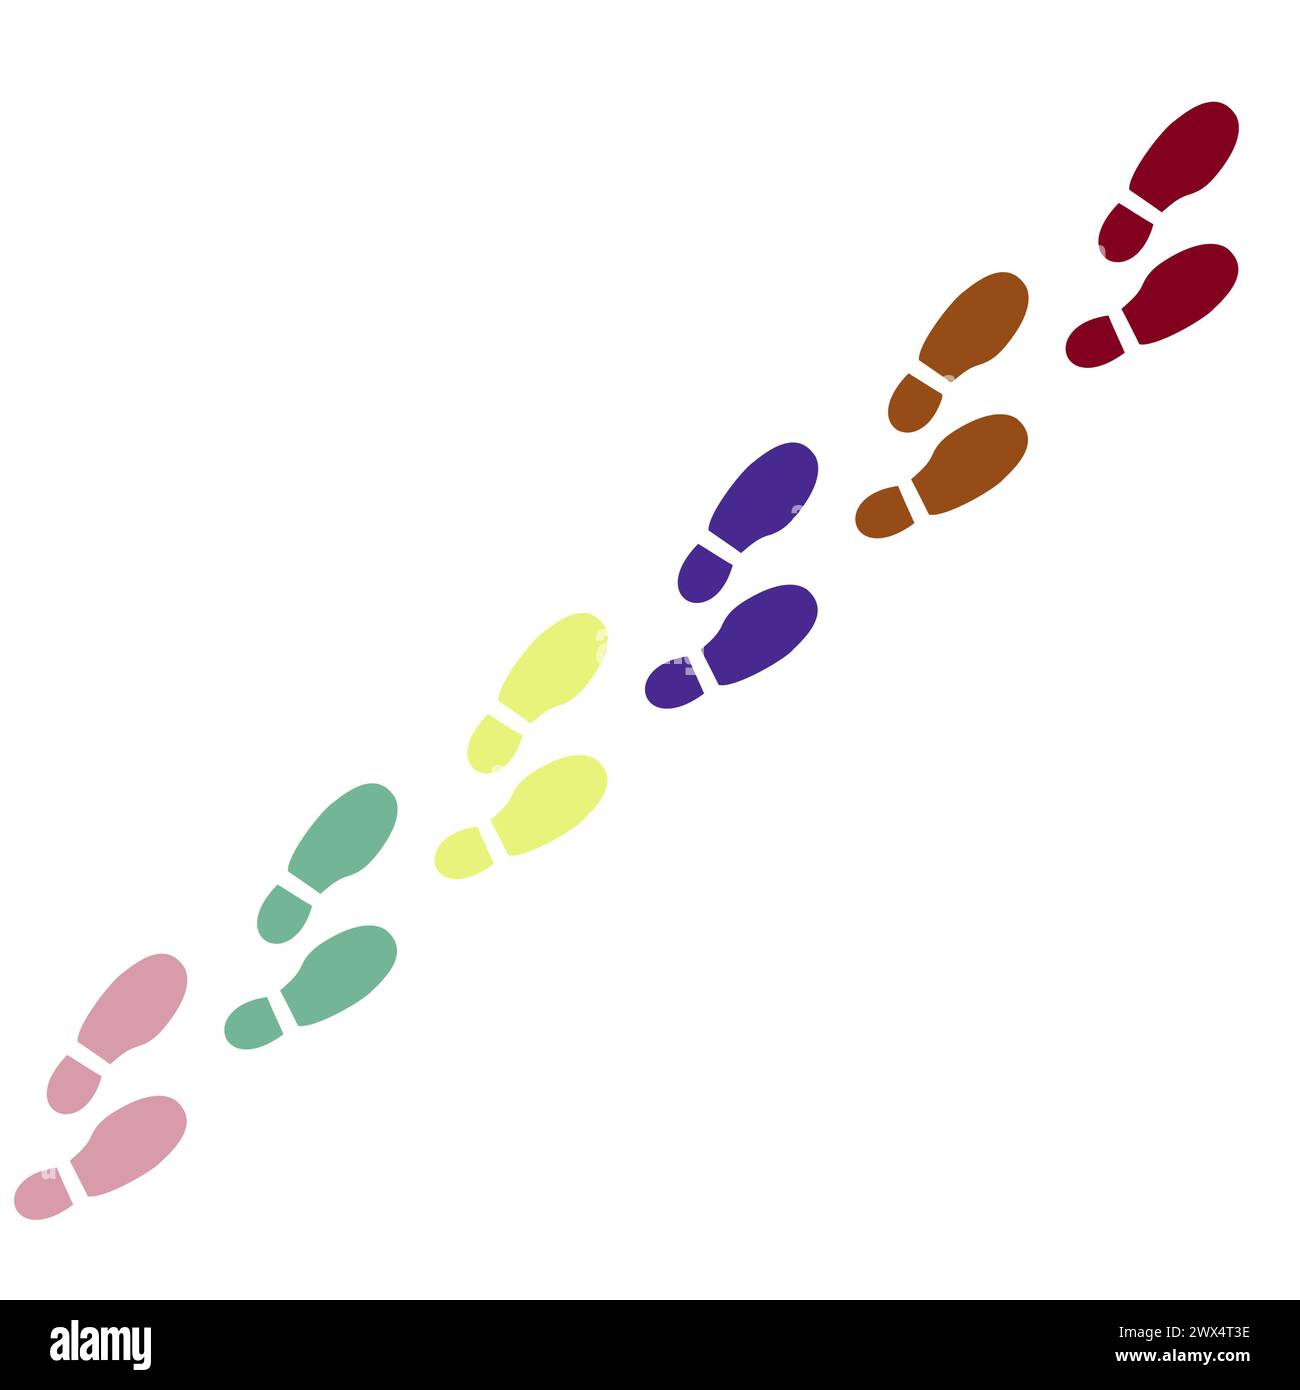 A vector showing multicoloured human footprints in a line, symbolic of the way forward in life. Stock Vector